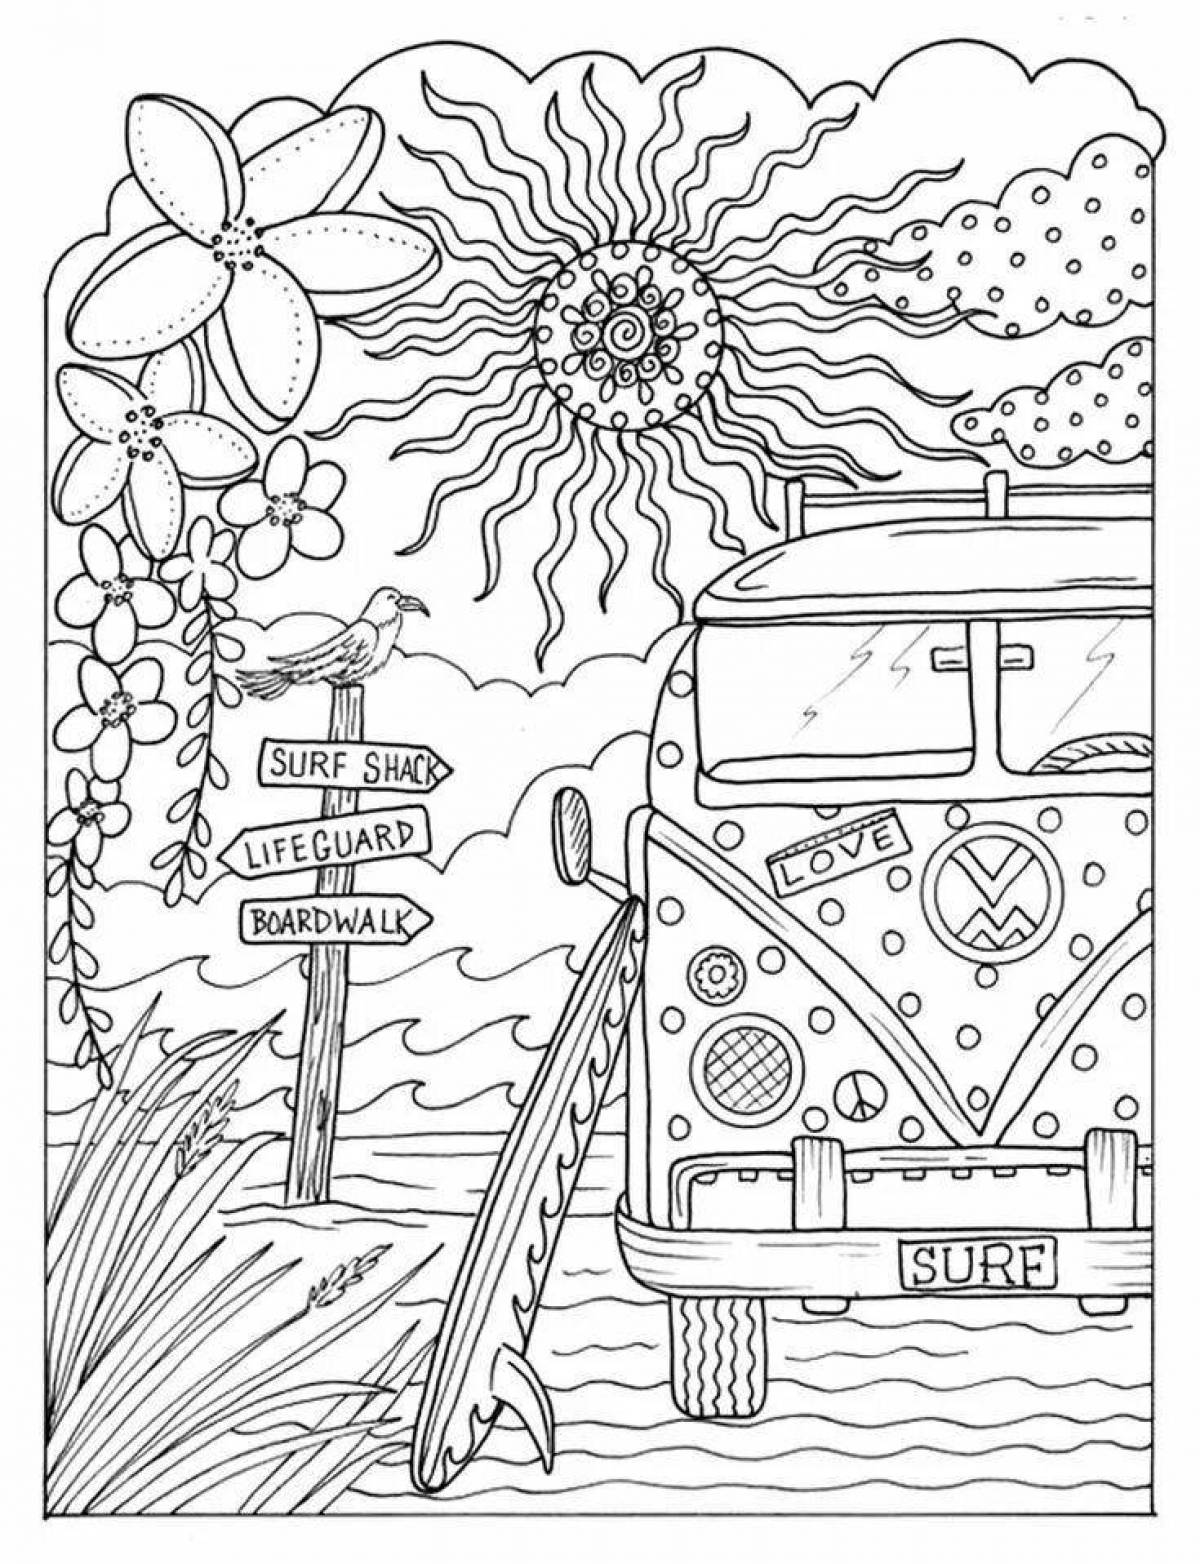 Majestic journey coloring page